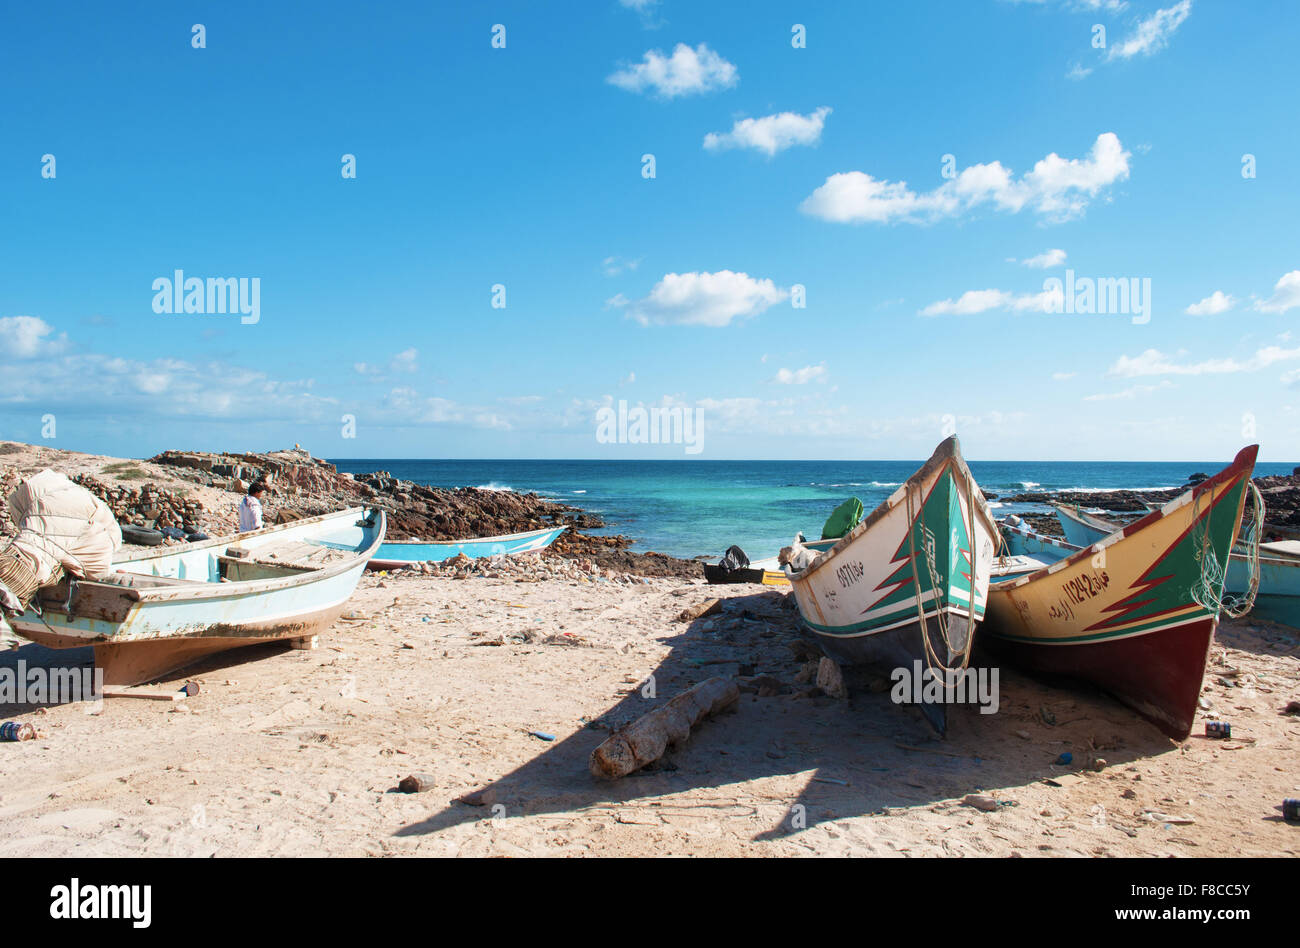 Yemen: boats on the beach in the protected area of Ras Erissel, the eastern cape of Socotra, the meeting point of the Arabian sea and the Indian Ocean Stock Photo